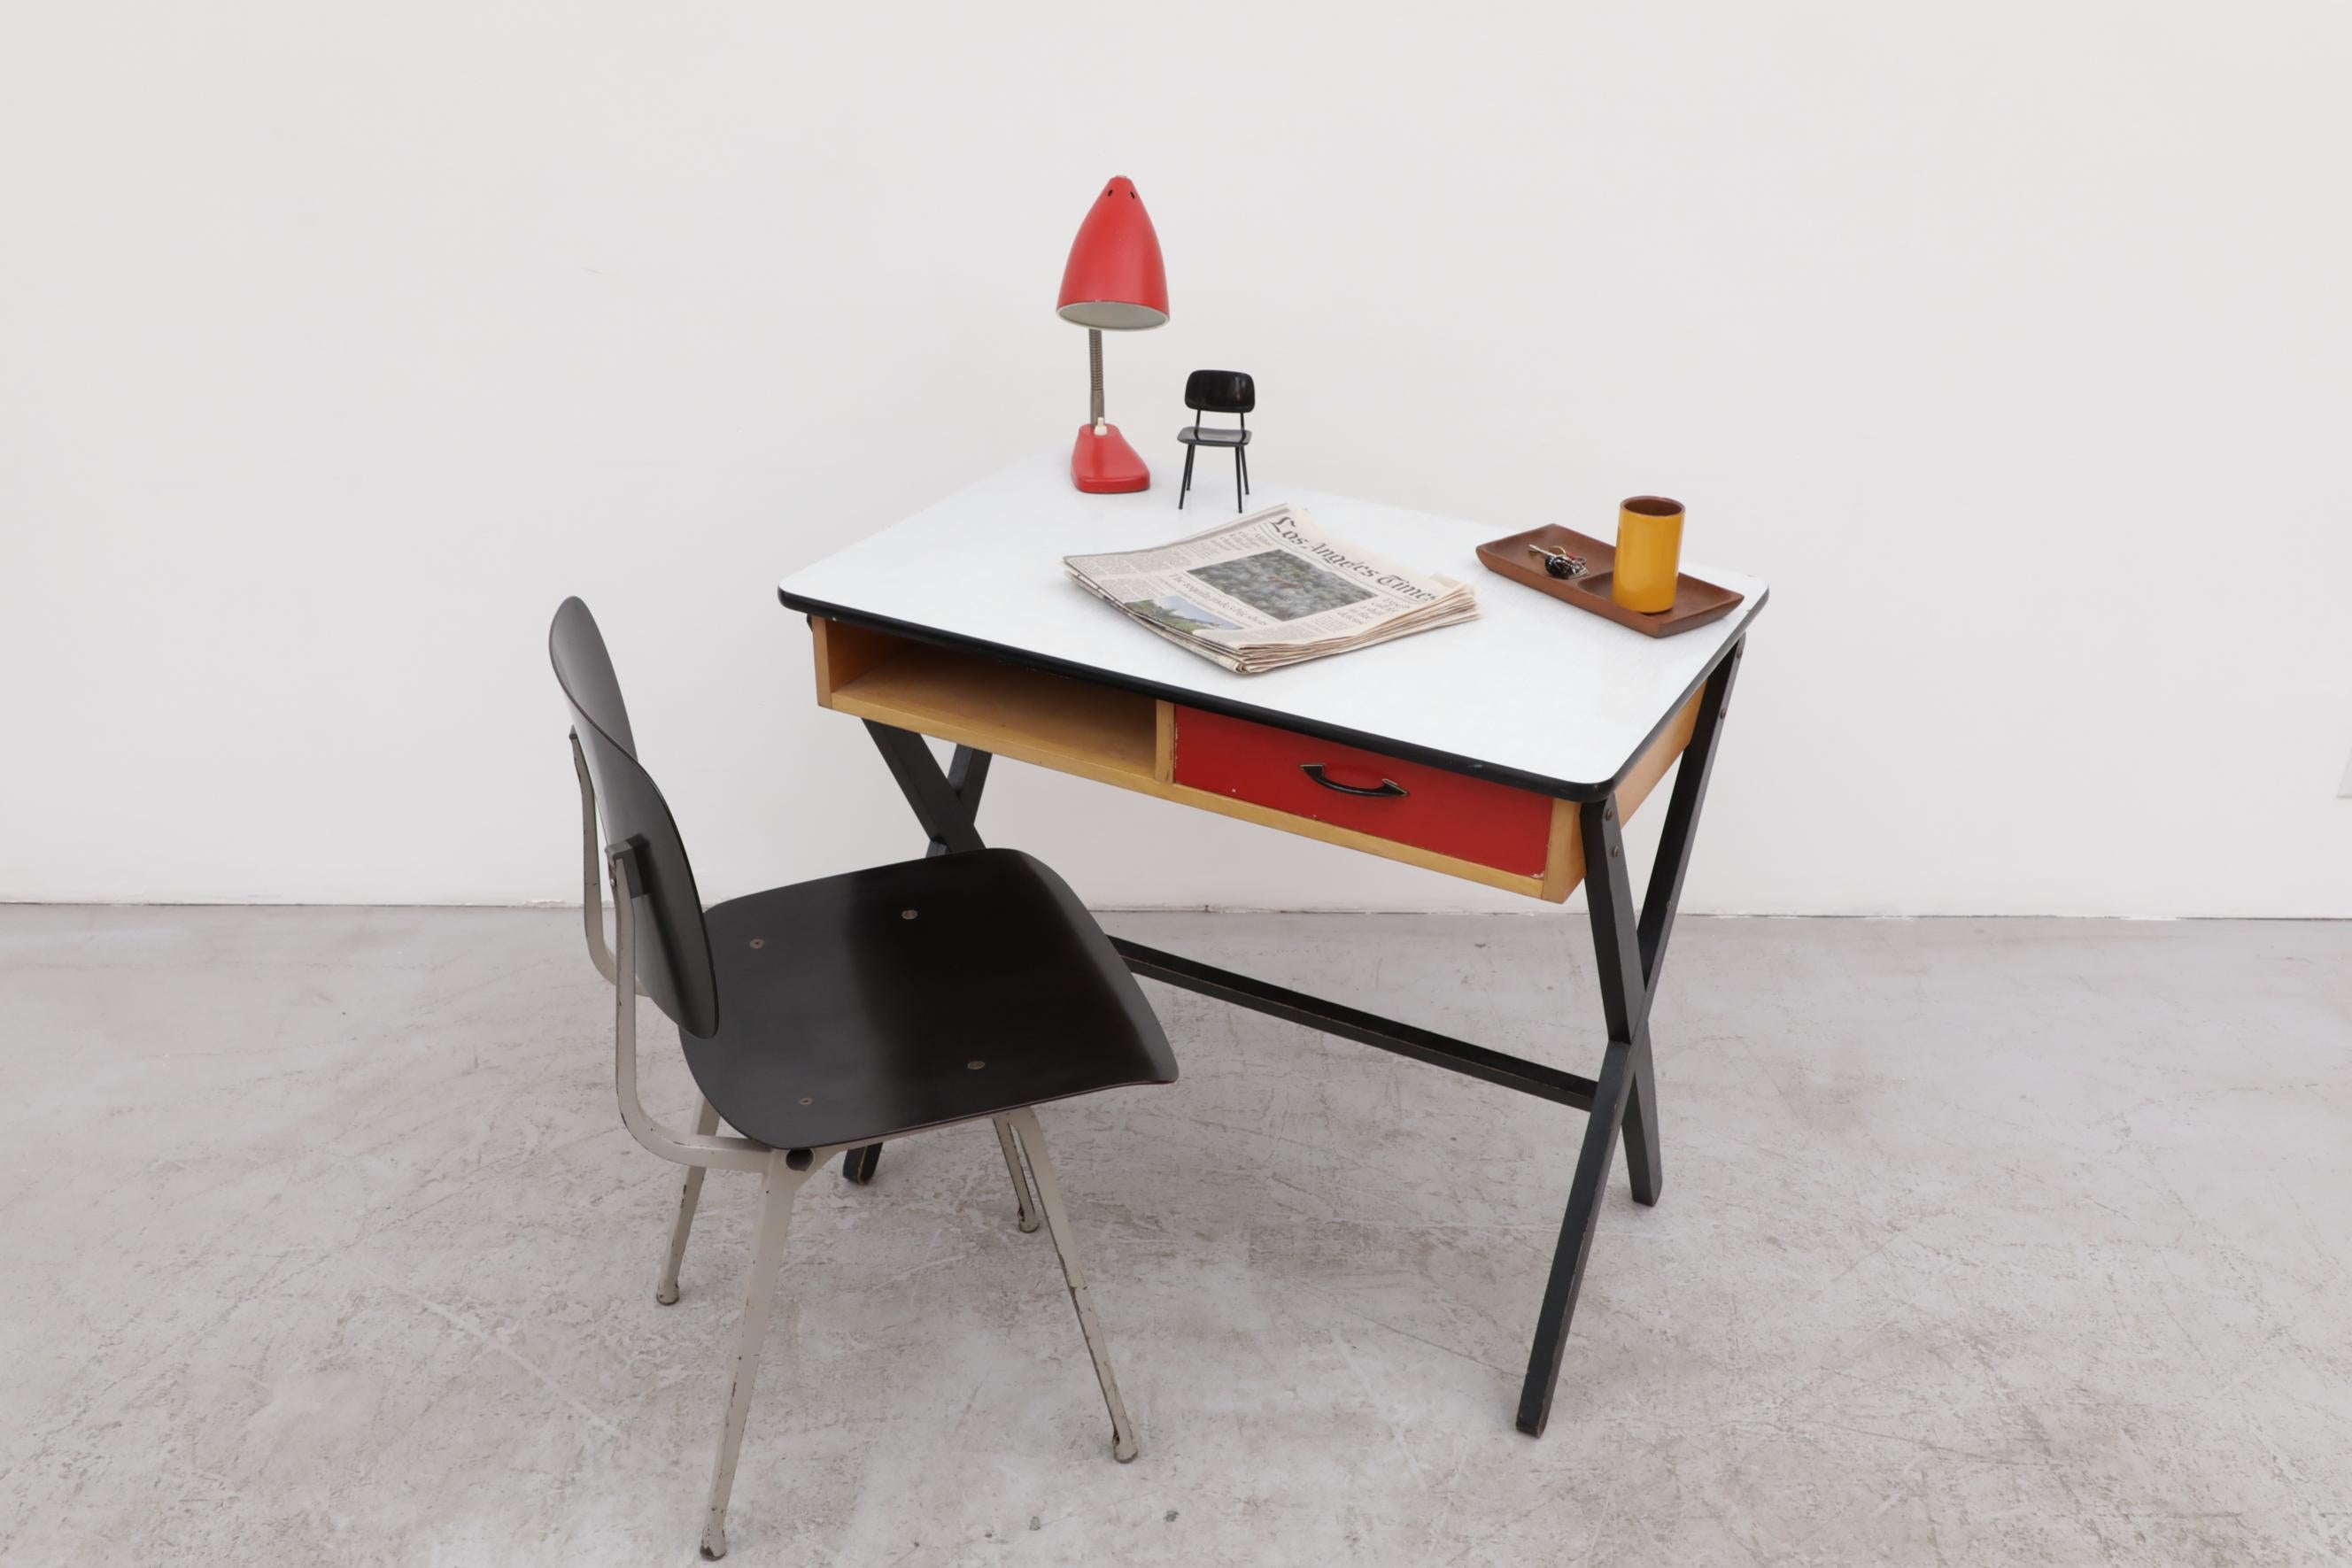 1954 Coen de Vries Desk in Birch w/ Ebony Base, Red Drawer and Formica Top For Sale 3